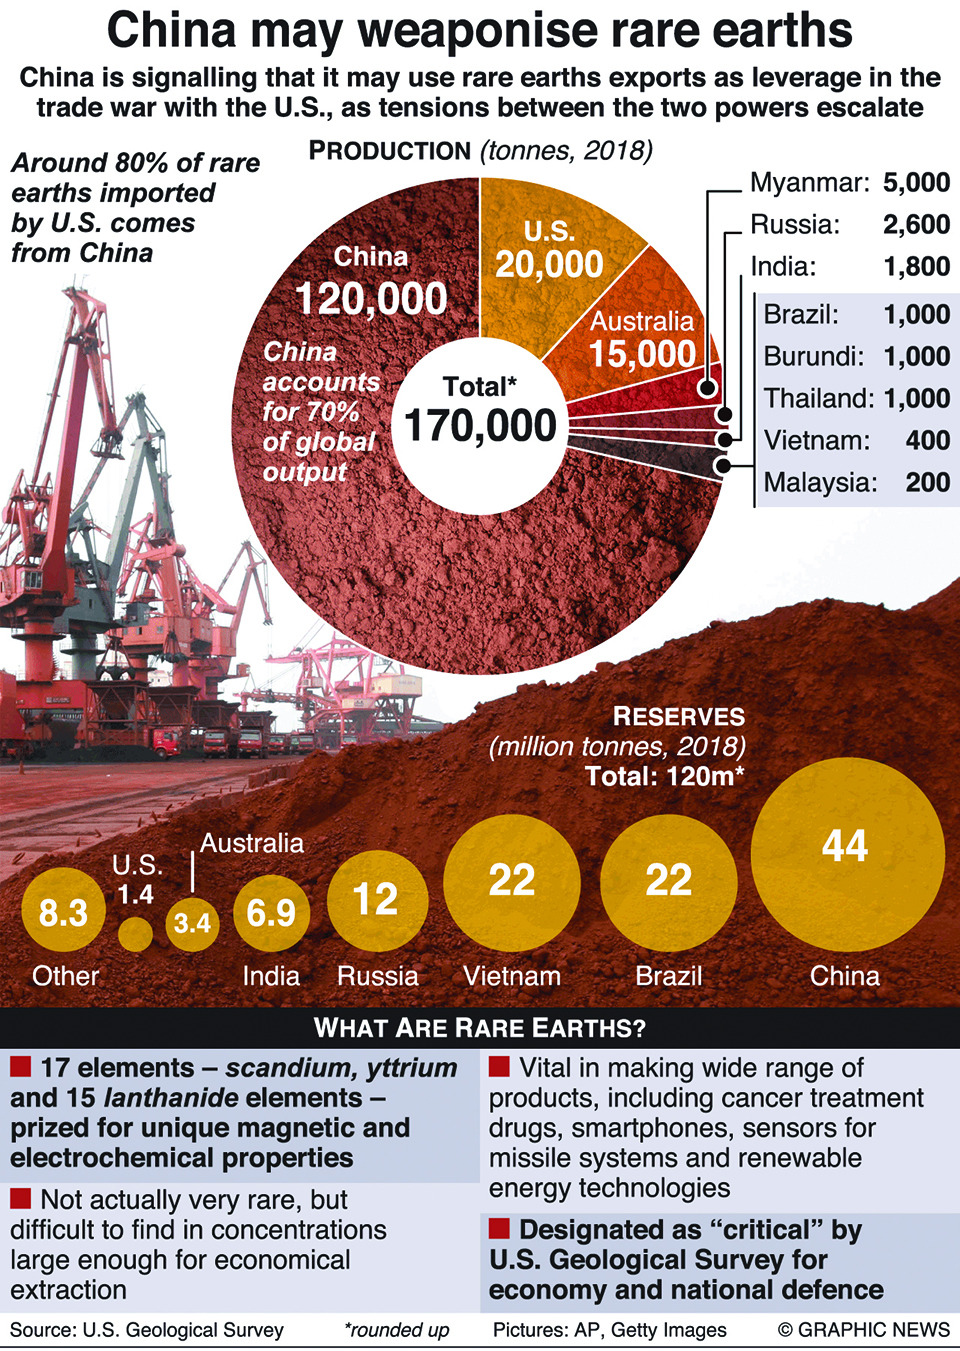 Infographics: China may weaponise rare earths in trade war with U.S.